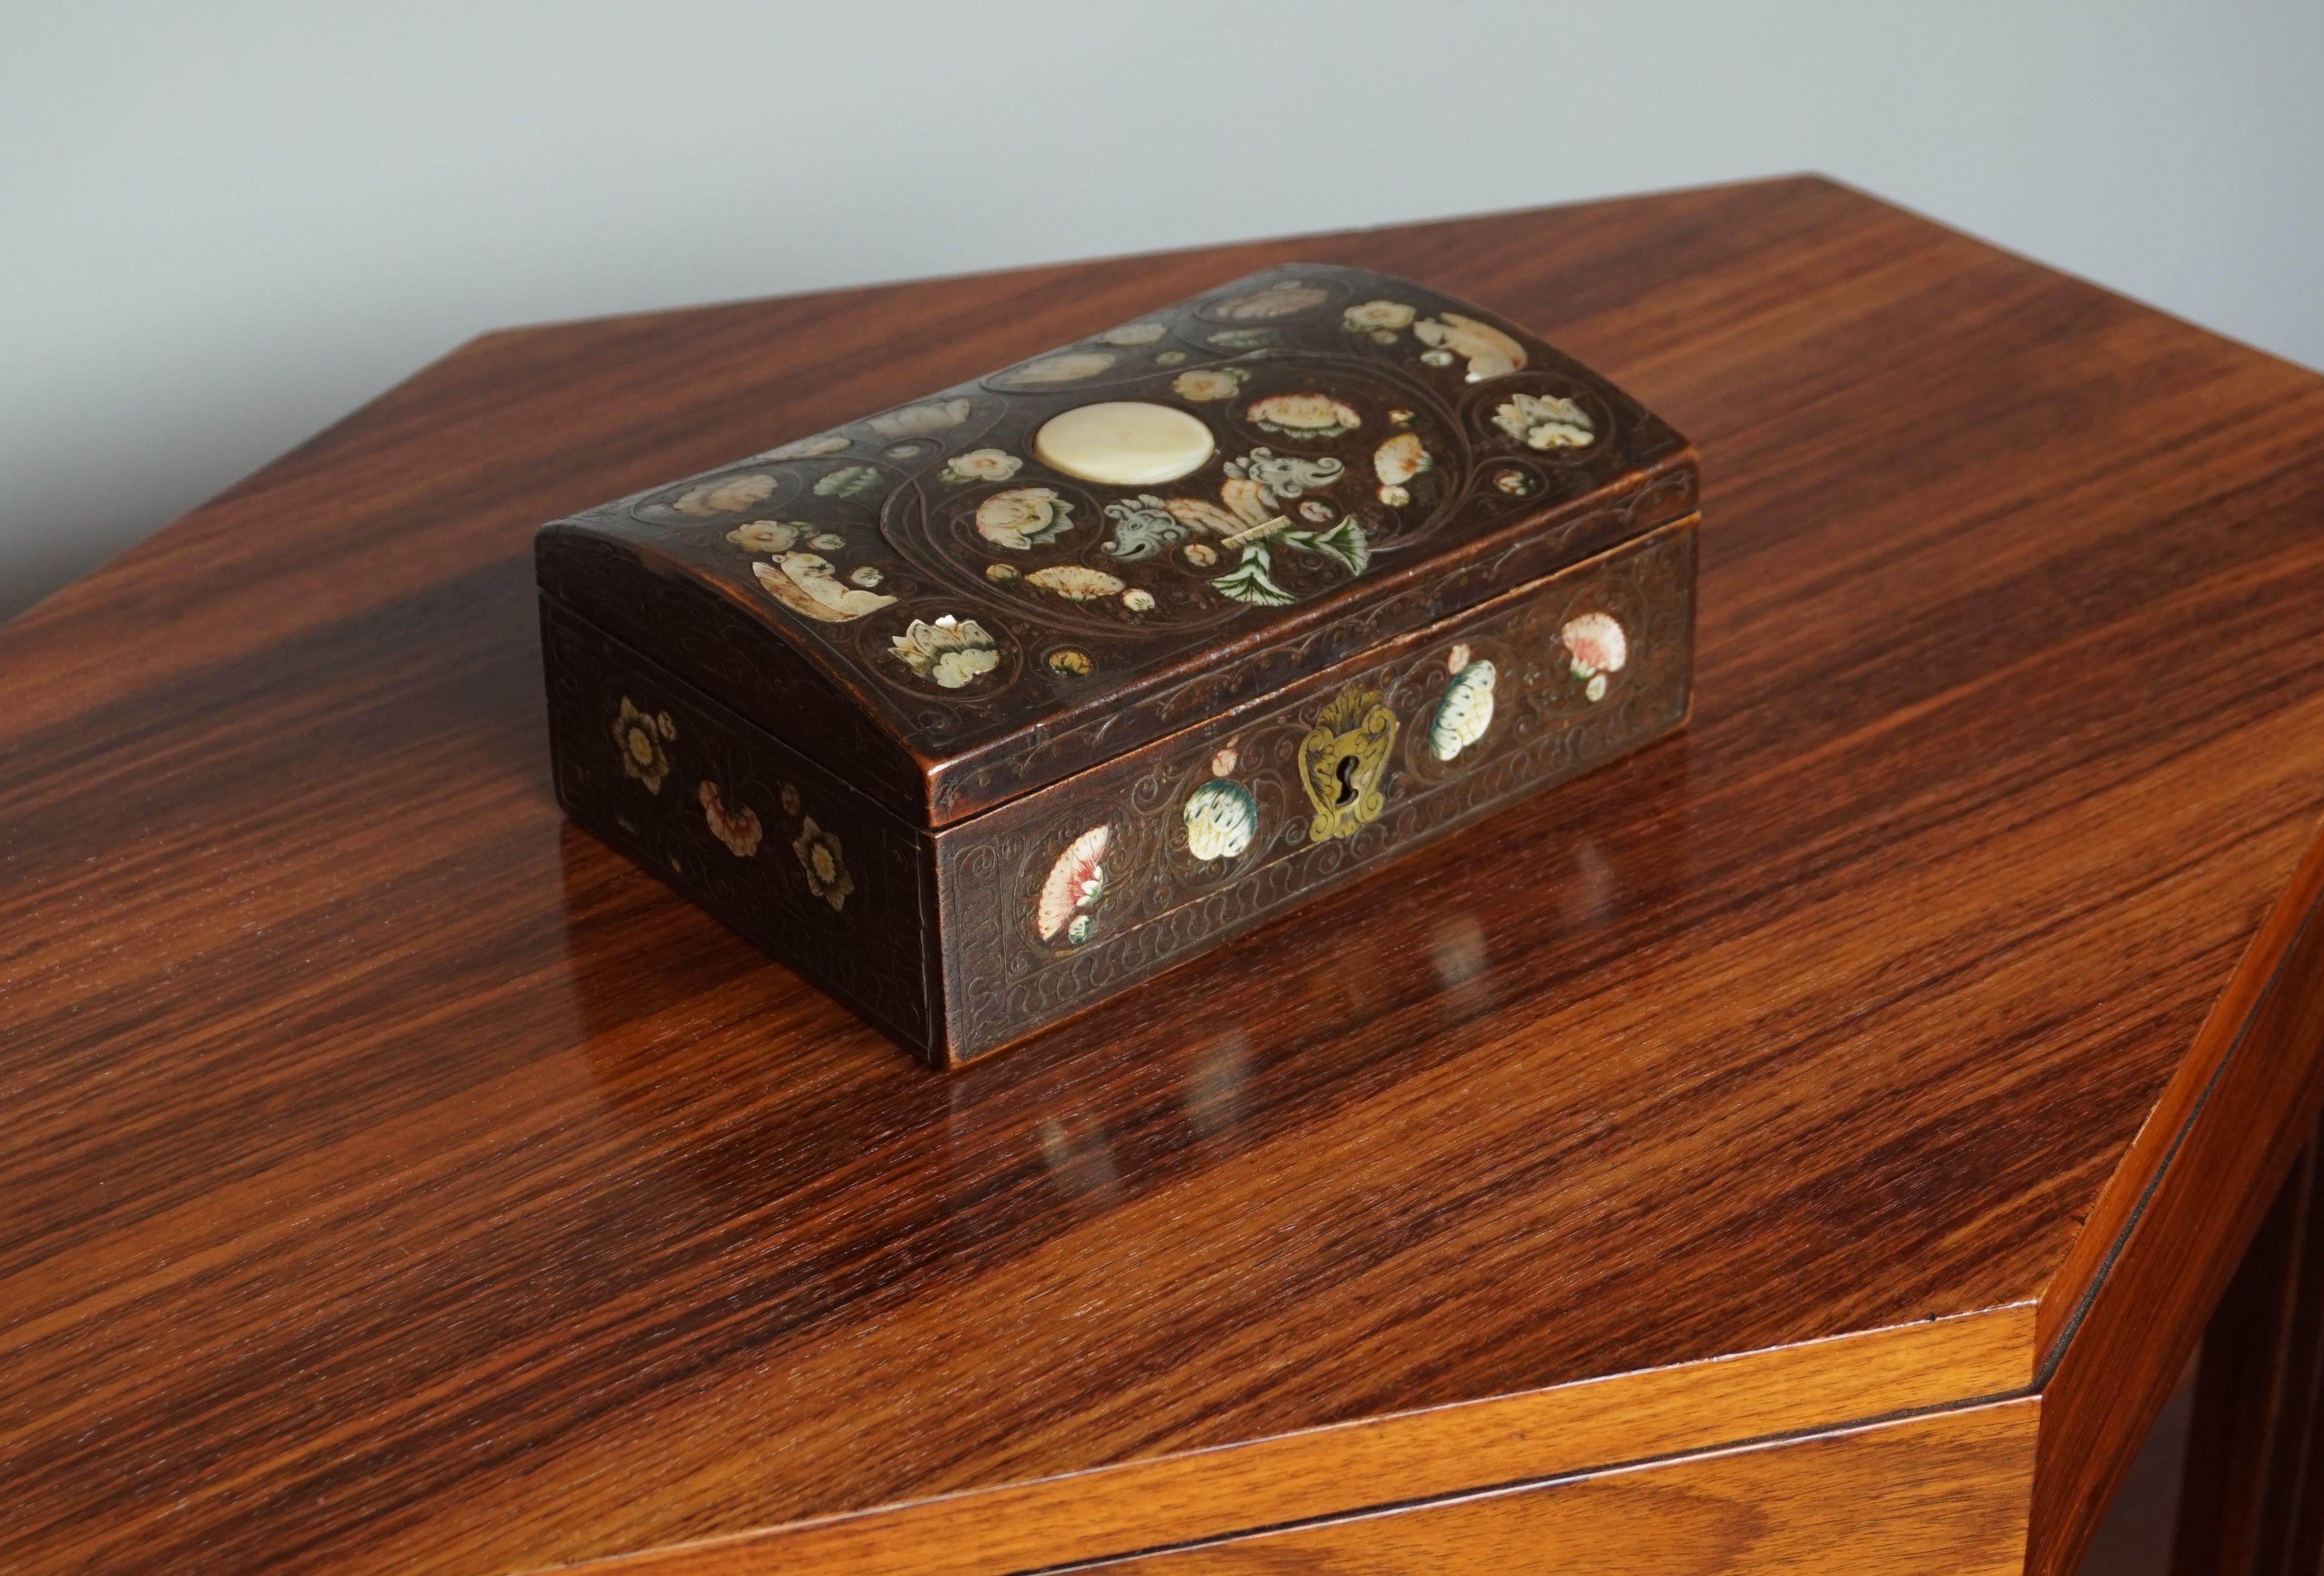 Belgian Very Rare, 17th Century Spa Mother of Pearl Writing Box with Inlaid Brass Wire